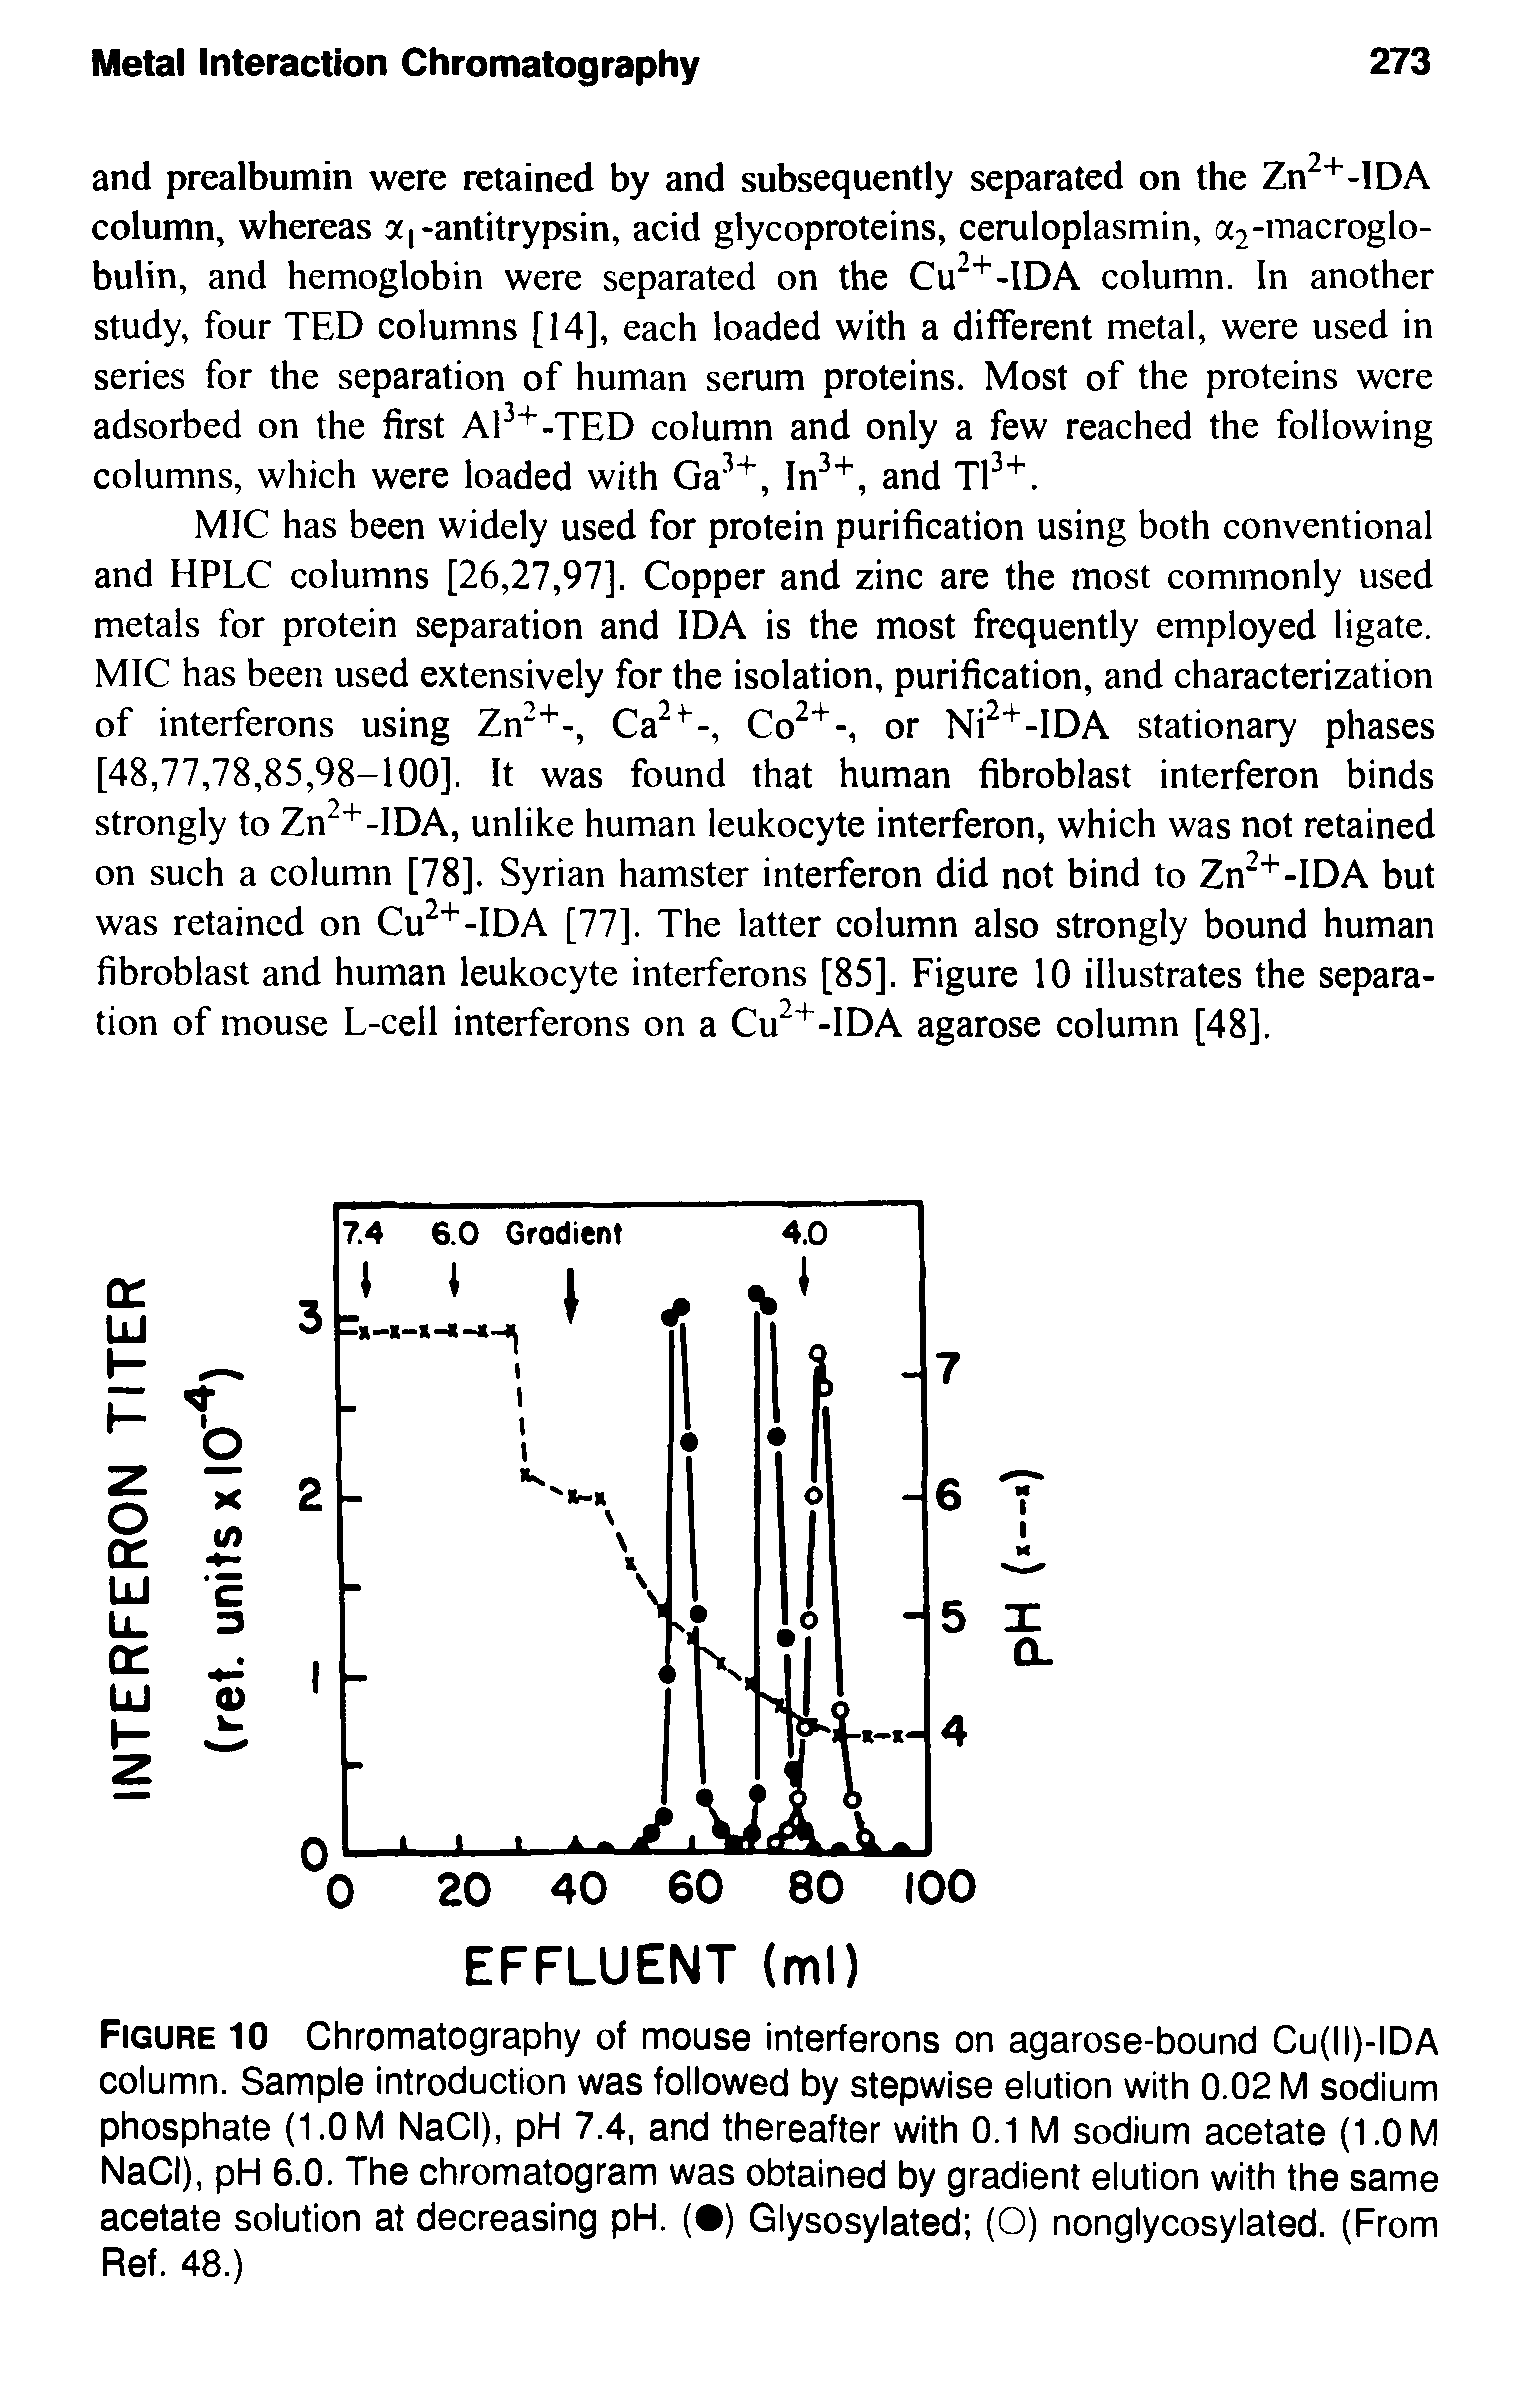 Figure 10 Chromatography of mouse interferons on agarose-bound Cu(ll)-IDA column. Sample introduction was followed by stepwise elution with 0.02 M sodium phosphate (1.0M NaCI), pH 7.4, and thereafter with 0.1 M sodium acetate (1.0M NaCI), pH 6.0. The chromatogram was obtained by gradient elution with the same acetate solution at decreasing pH. ( ) Glysosylated (O) nonglycosylated. (From Ref. 48.)...